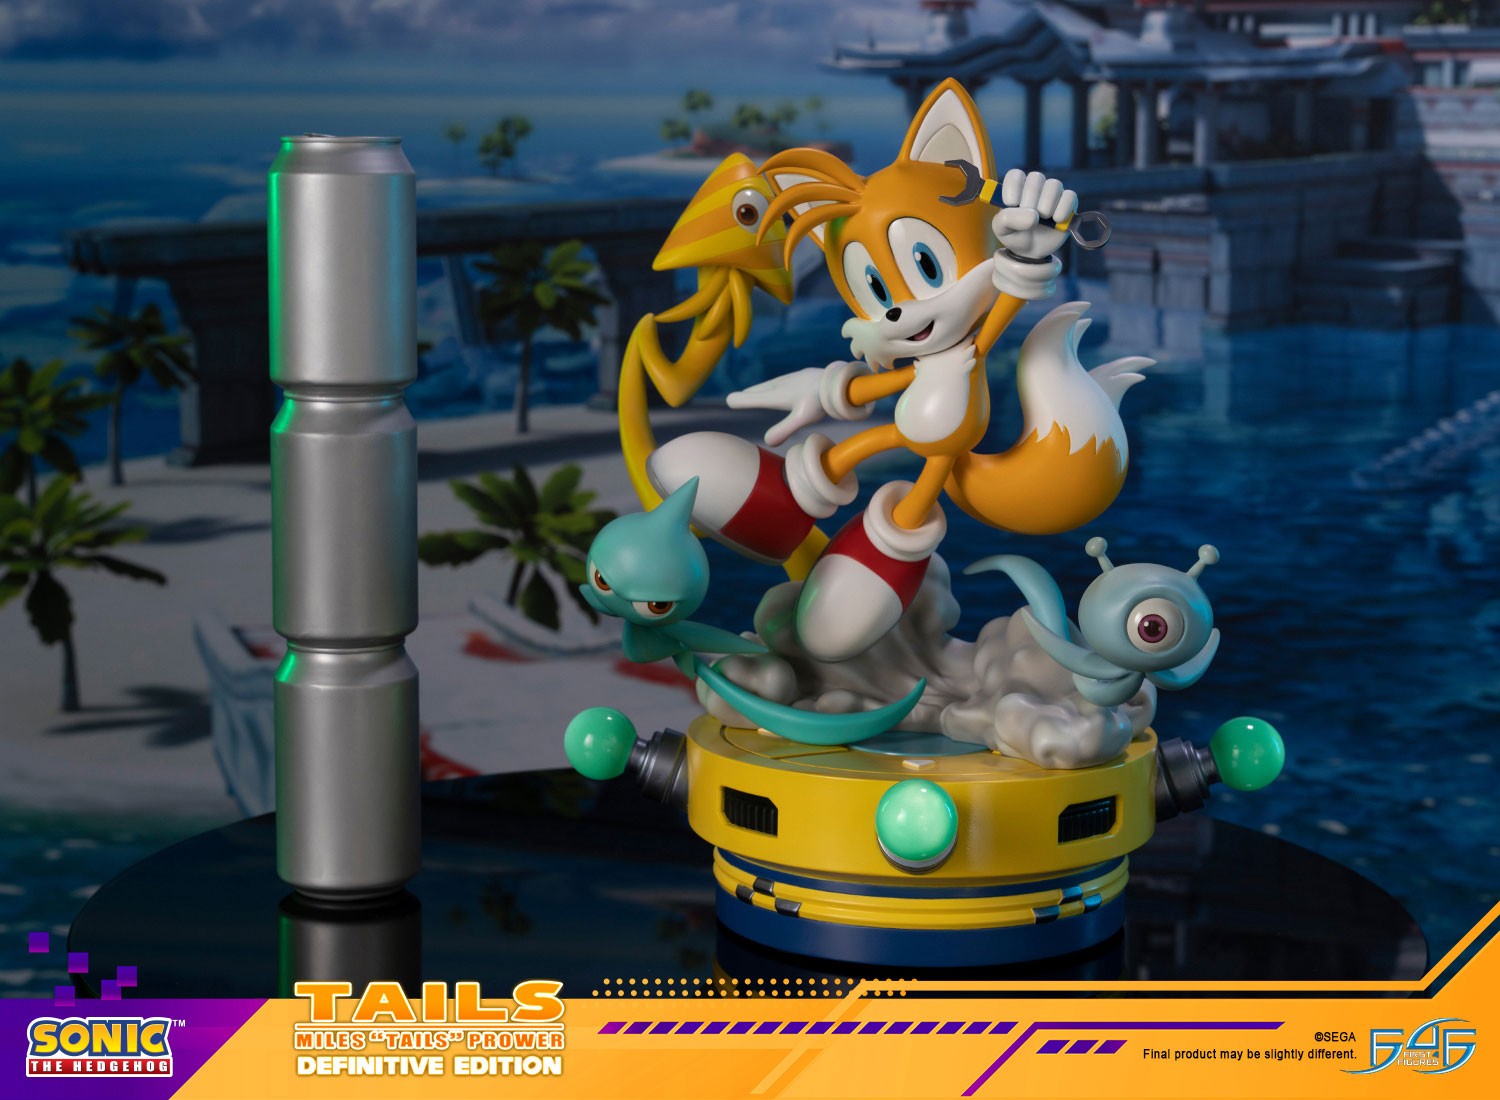 Gaming Heads F4F034 Tails Classic Sonic the Hedgehog Statue